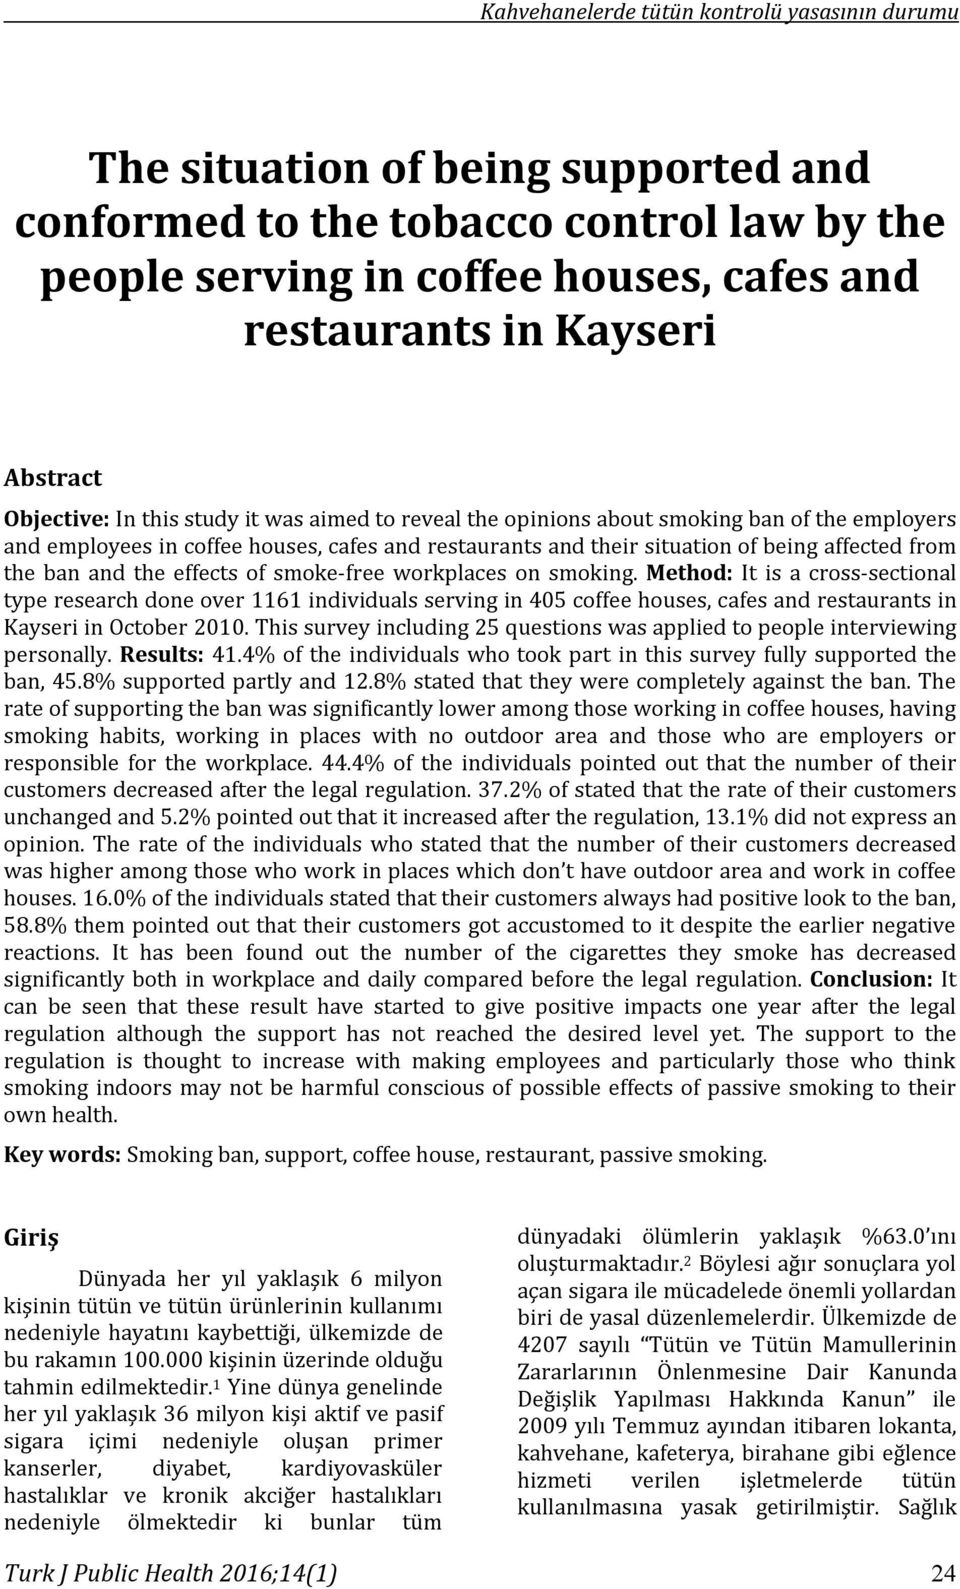 workplaces on smoking. Method: It is a cross-sectional type research done over 1161 individuals serving in 405 coffee houses, cafes and restaurants in Kayseri in October 2010.